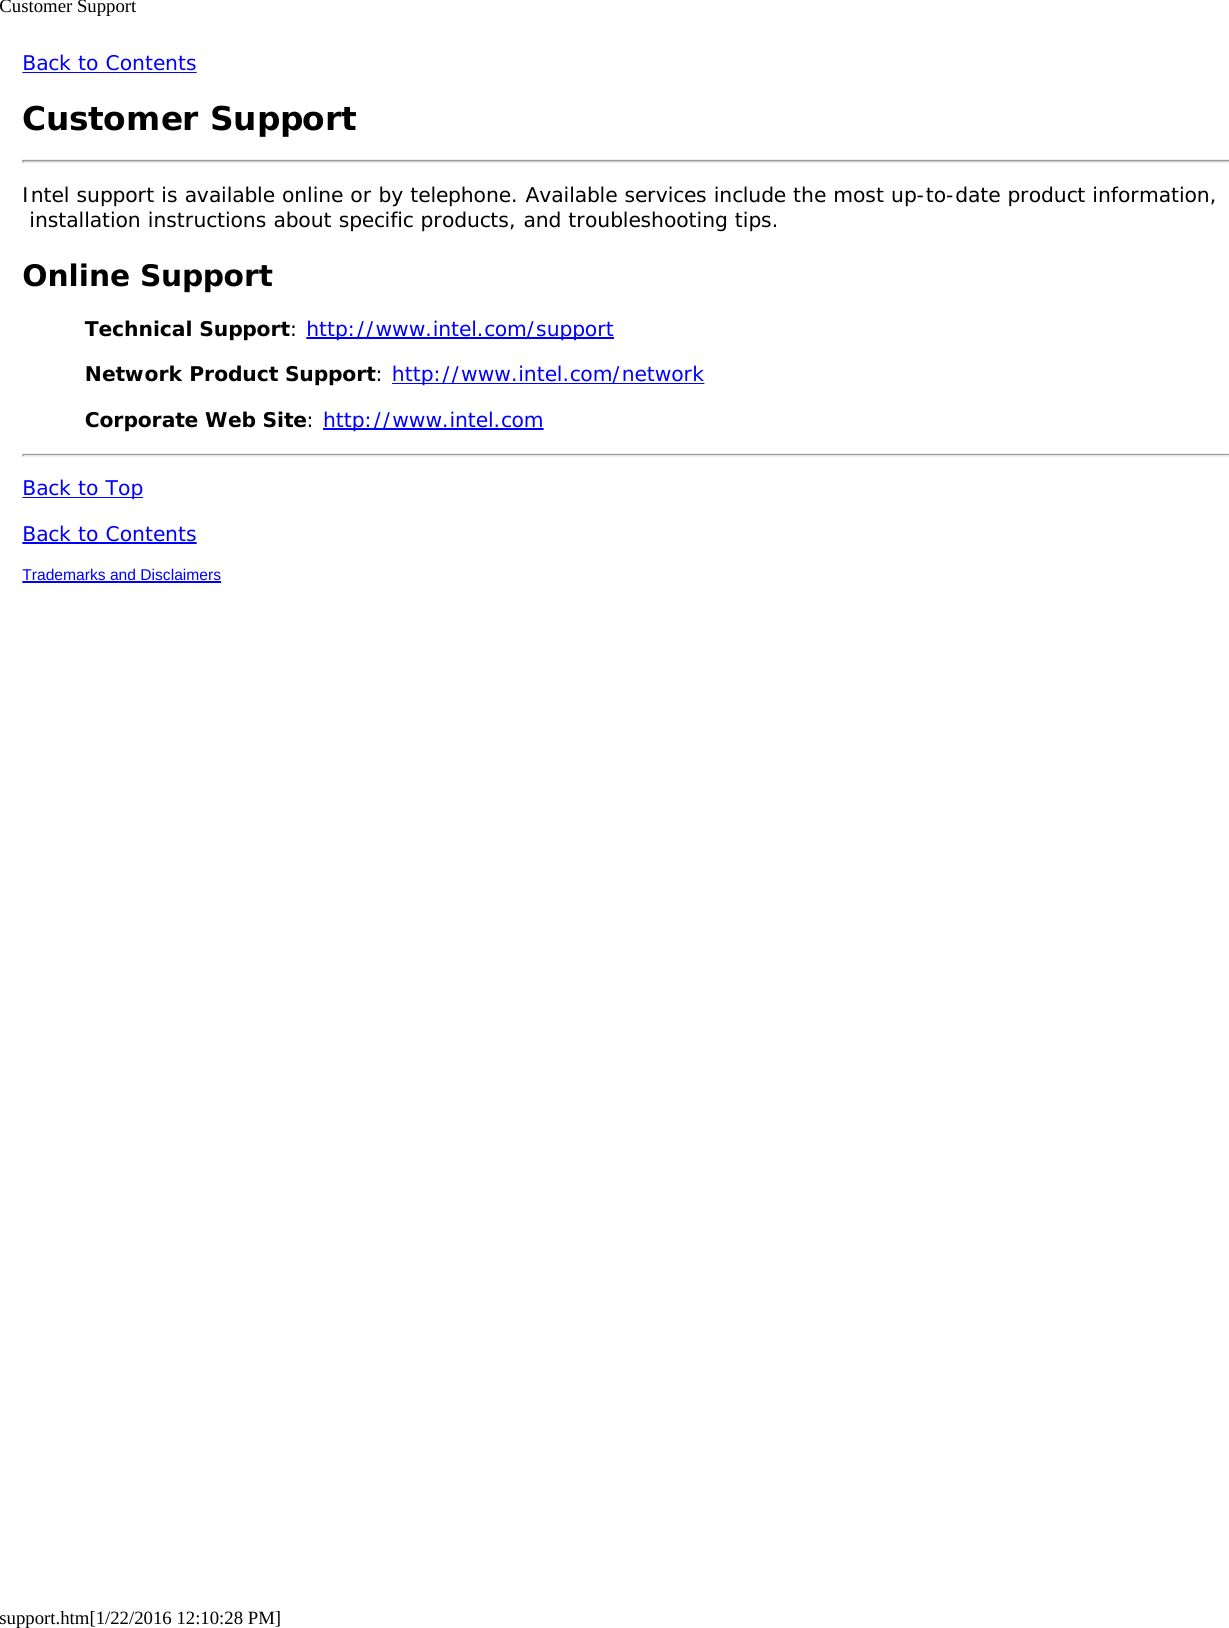 Customer Supportsupport.htm[1/22/2016 12:10:28 PM]Back to ContentsCustomer SupportIntel support is available online or by telephone. Available services include the most up-to-date product information, installation instructions about specific products, and troubleshooting tips.Online SupportTechnical Support: http://www.intel.com/supportNetwork Product Support: http://www.intel.com/networkCorporate Web Site: http://www.intel.comBack to TopBack to ContentsTrademarks and Disclaimers